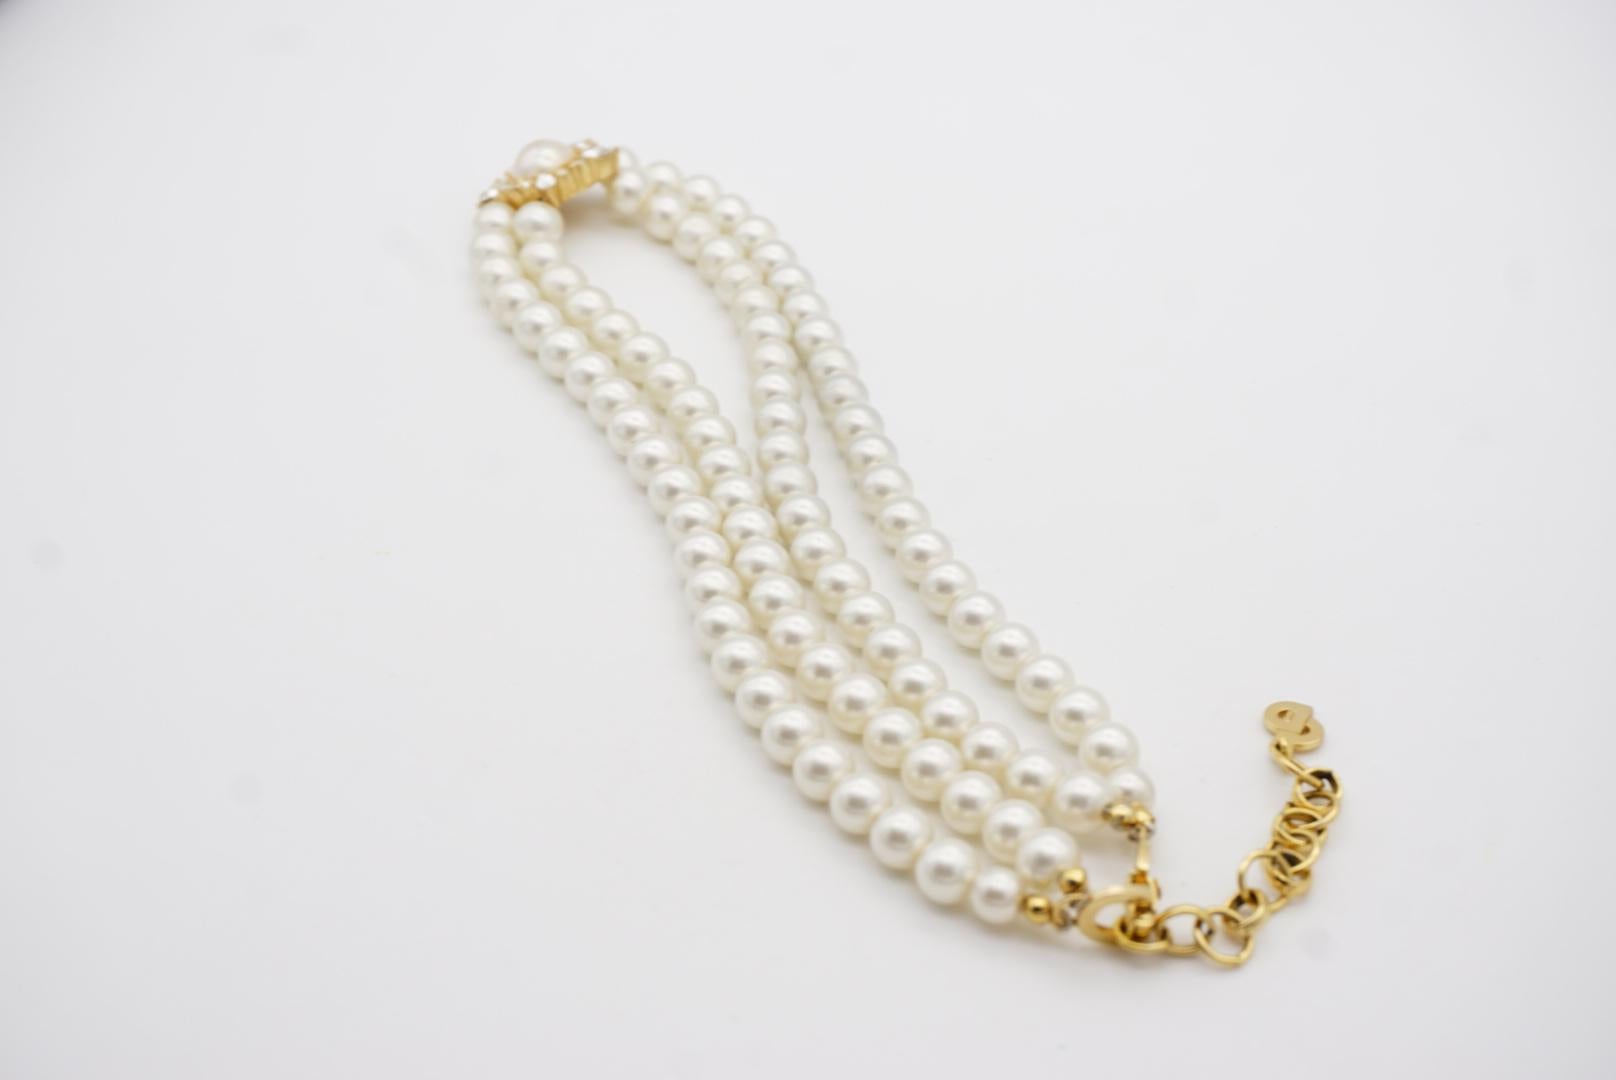 Christian Dior Vintage 1970s Double Strands Pearls Pentagon Crystals Necklace 7